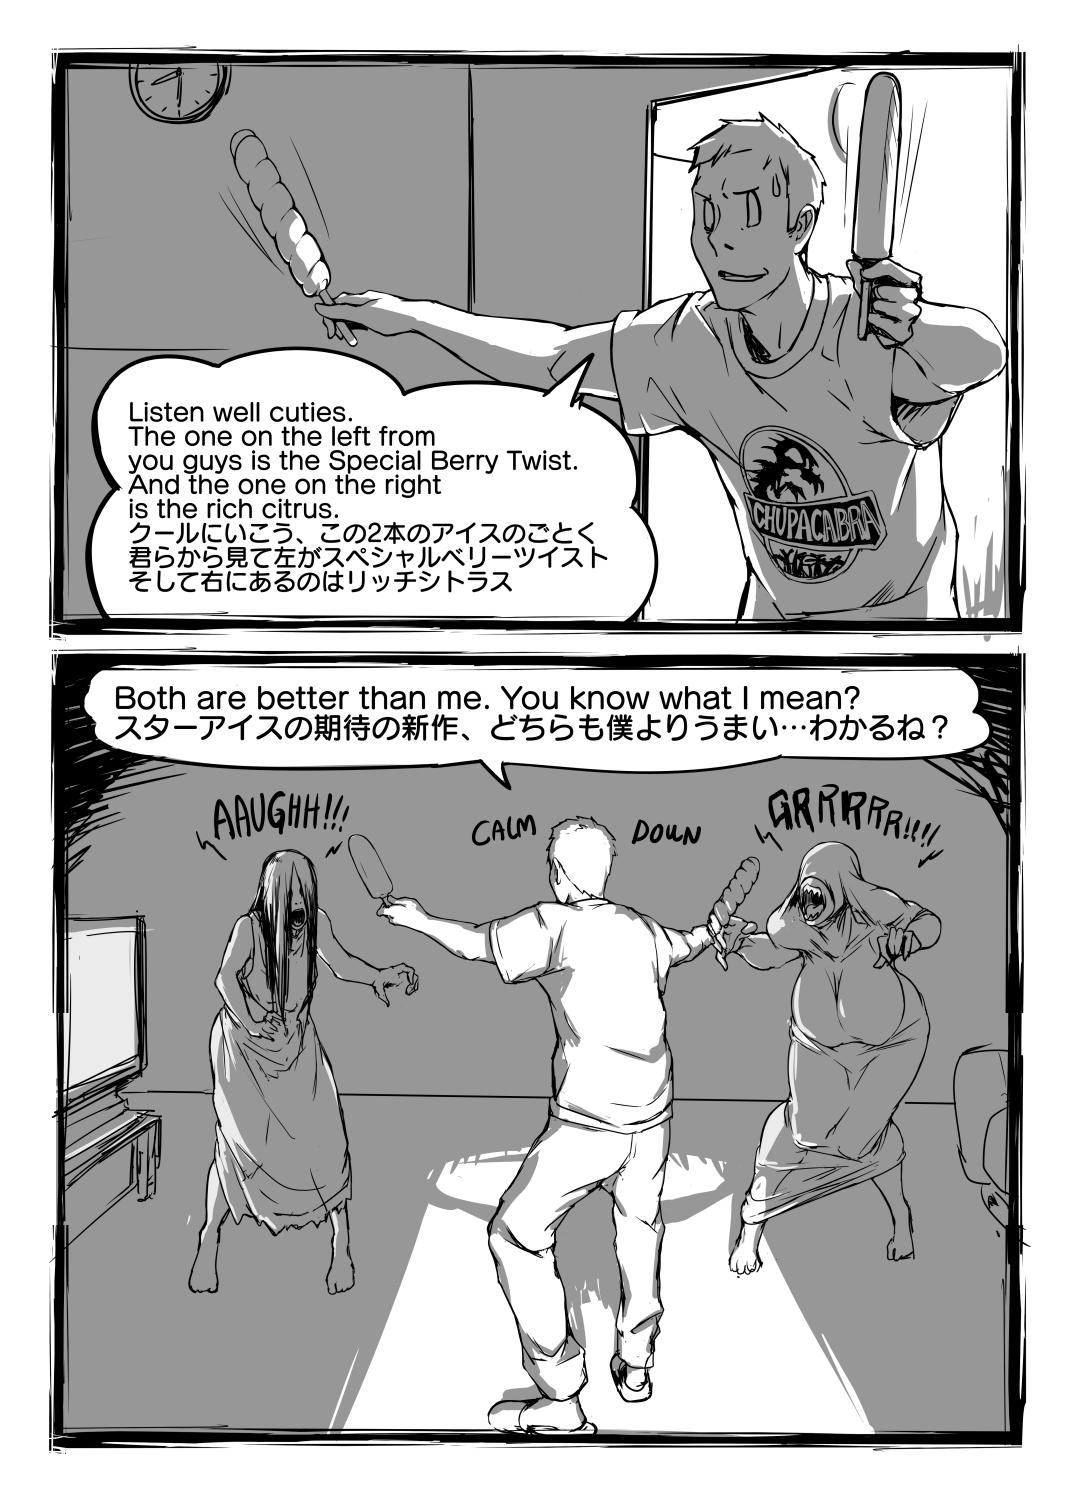 Anime Fear and Scream - The ring Gor Extreme - Page 10